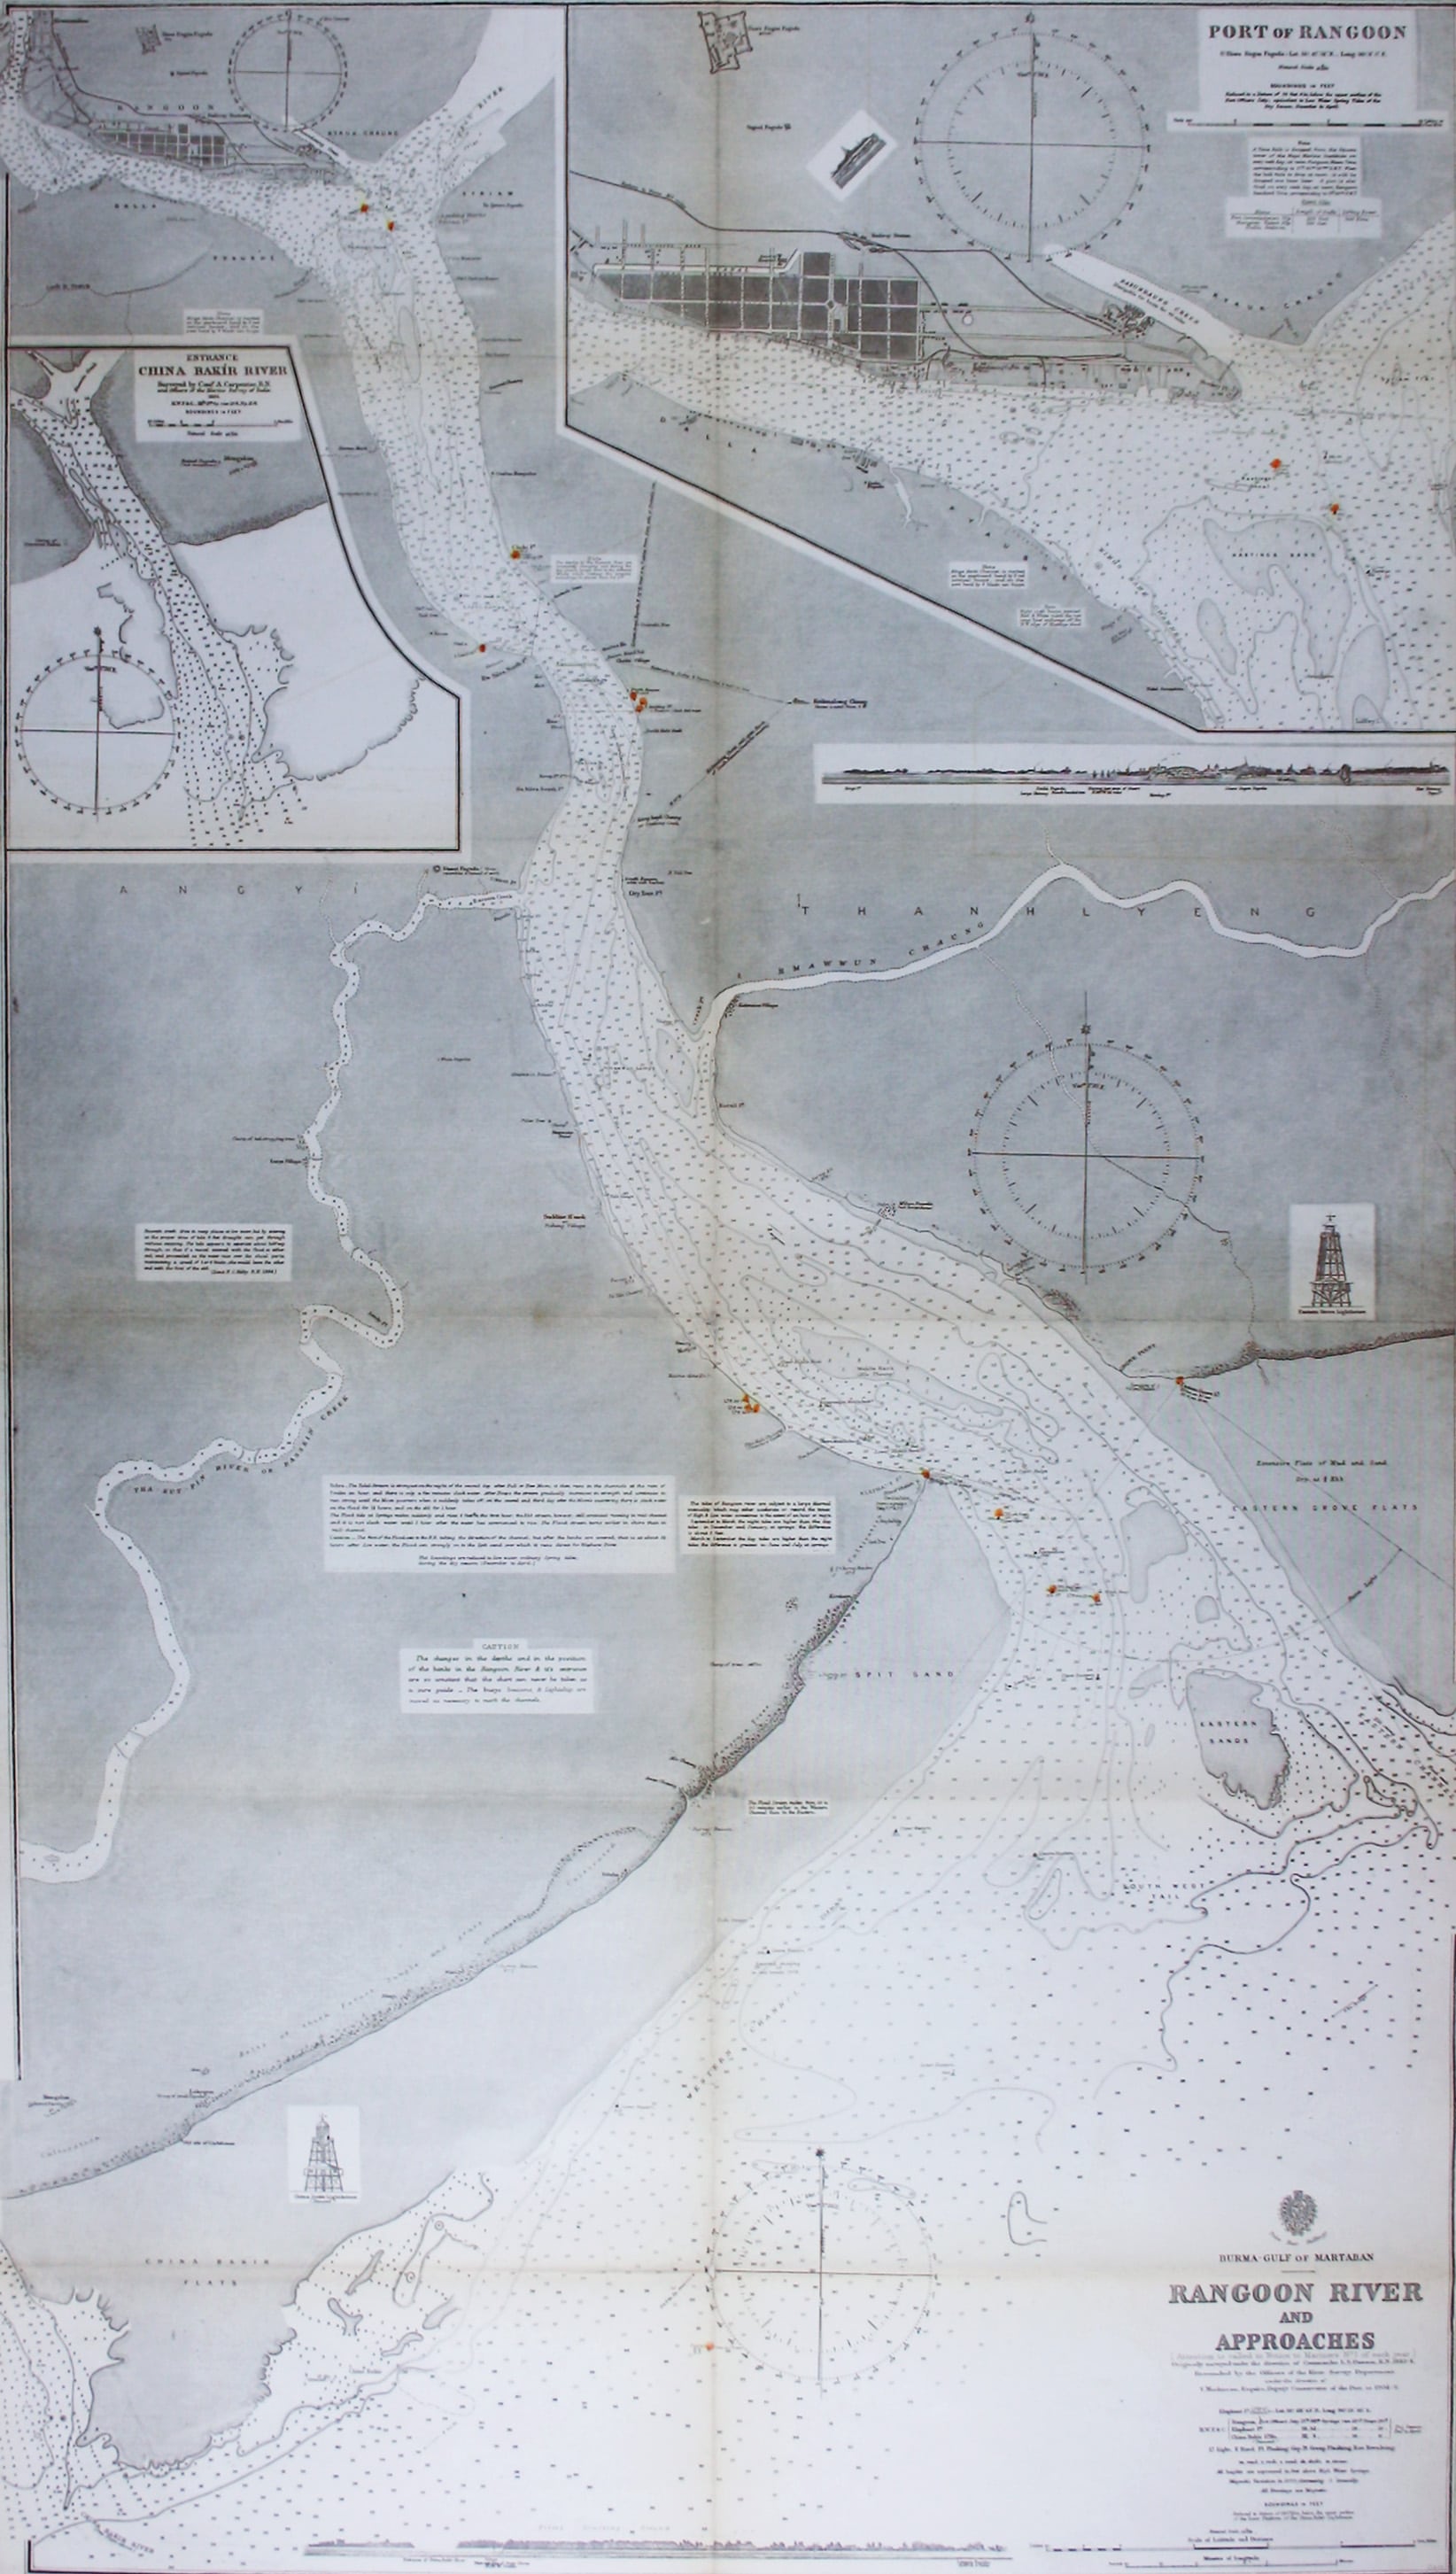 Admiralty Chart of the Approach to Rangoon